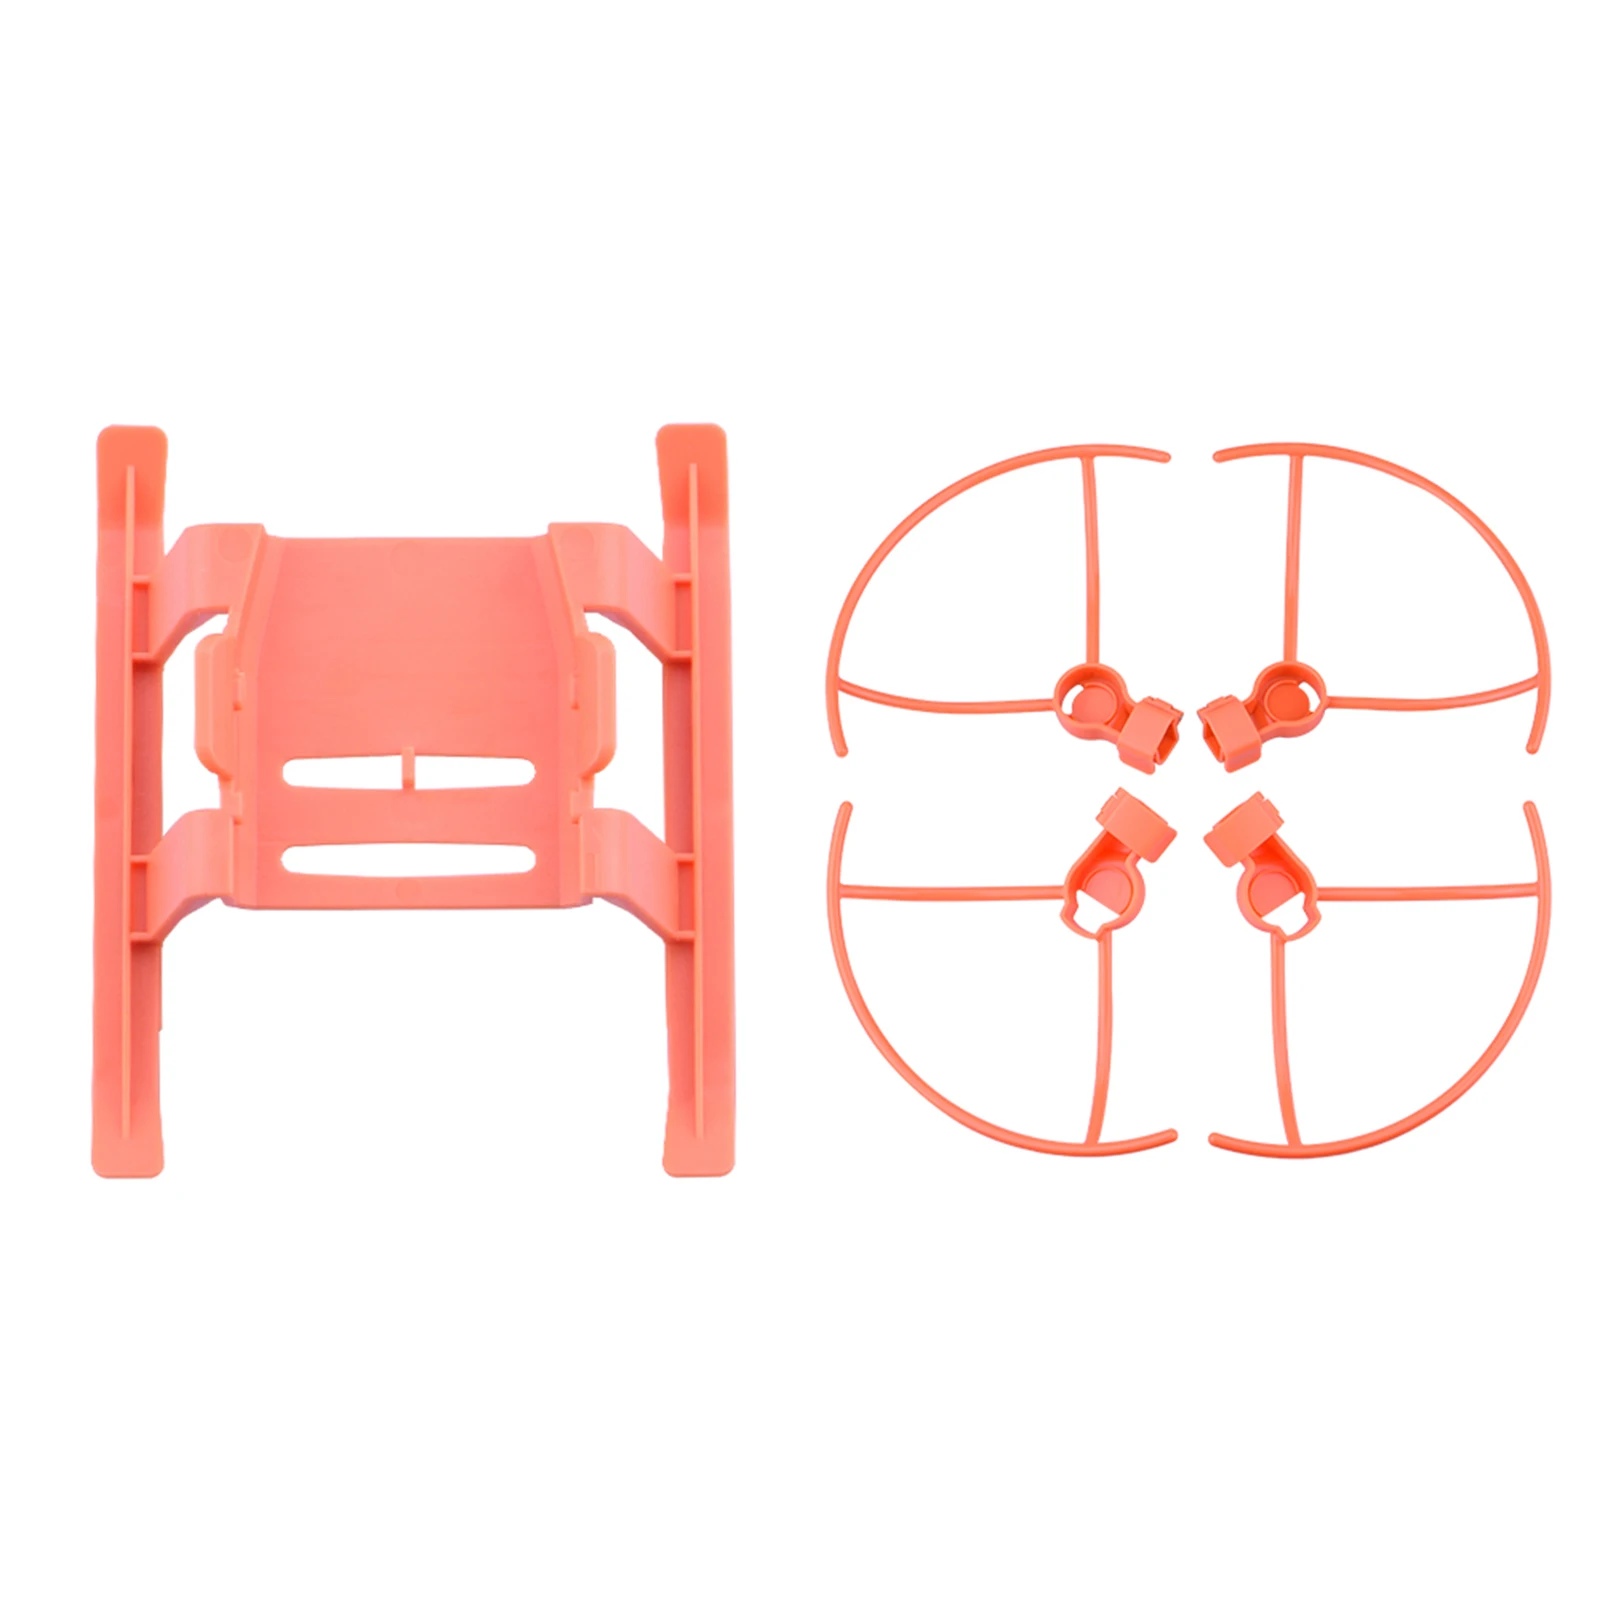 Landing Gear Kit For xiaomi FIMI X8 MINI Drone Height Extender Skid Support Accessories Shock Absorption Protector Guard Stand 